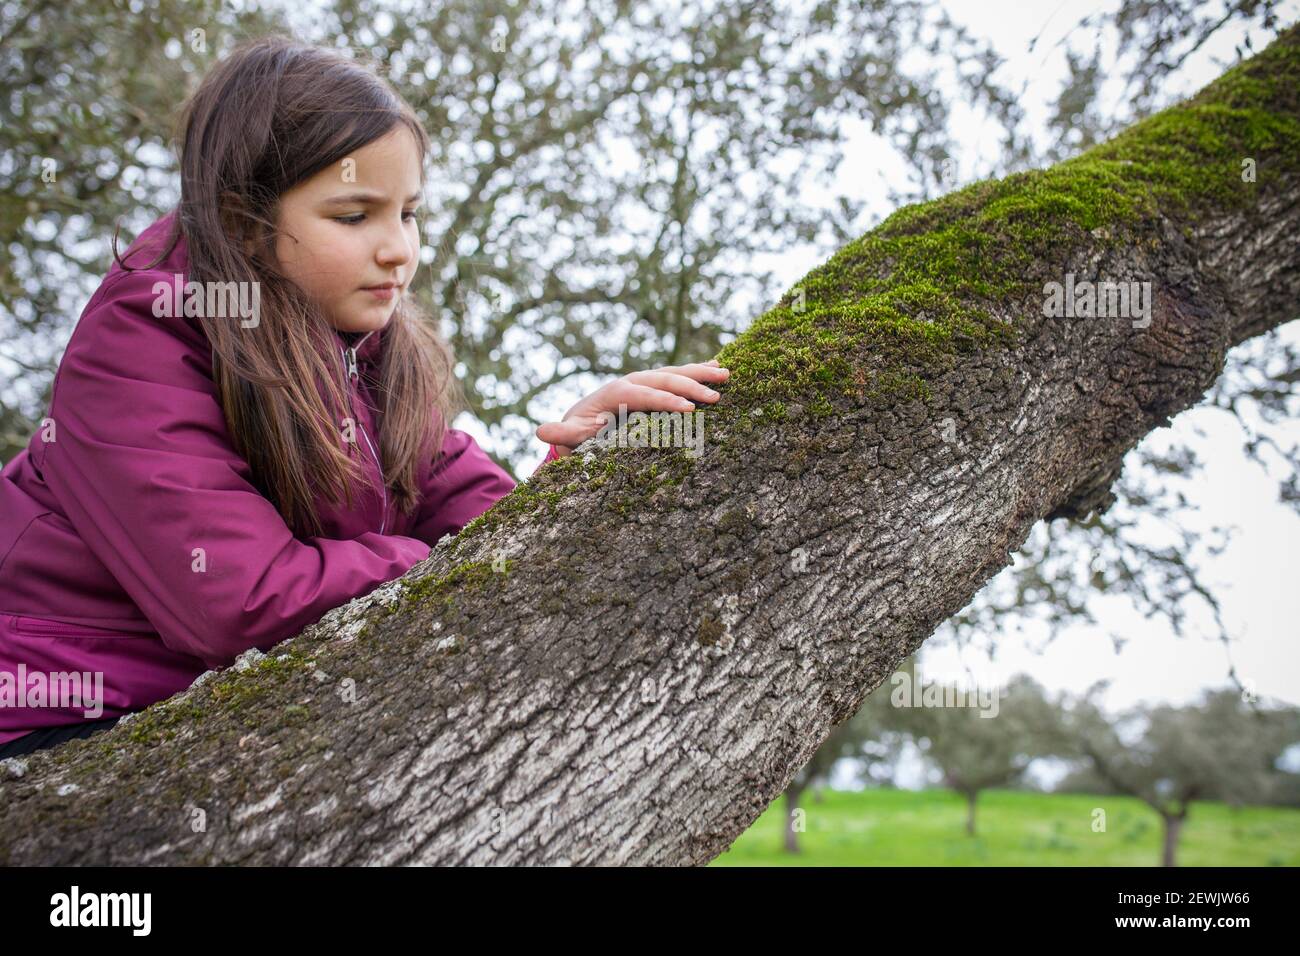 Child girl feeling tree moss over branch. Children discovering textures in nature. Selective focus. Stock Photo